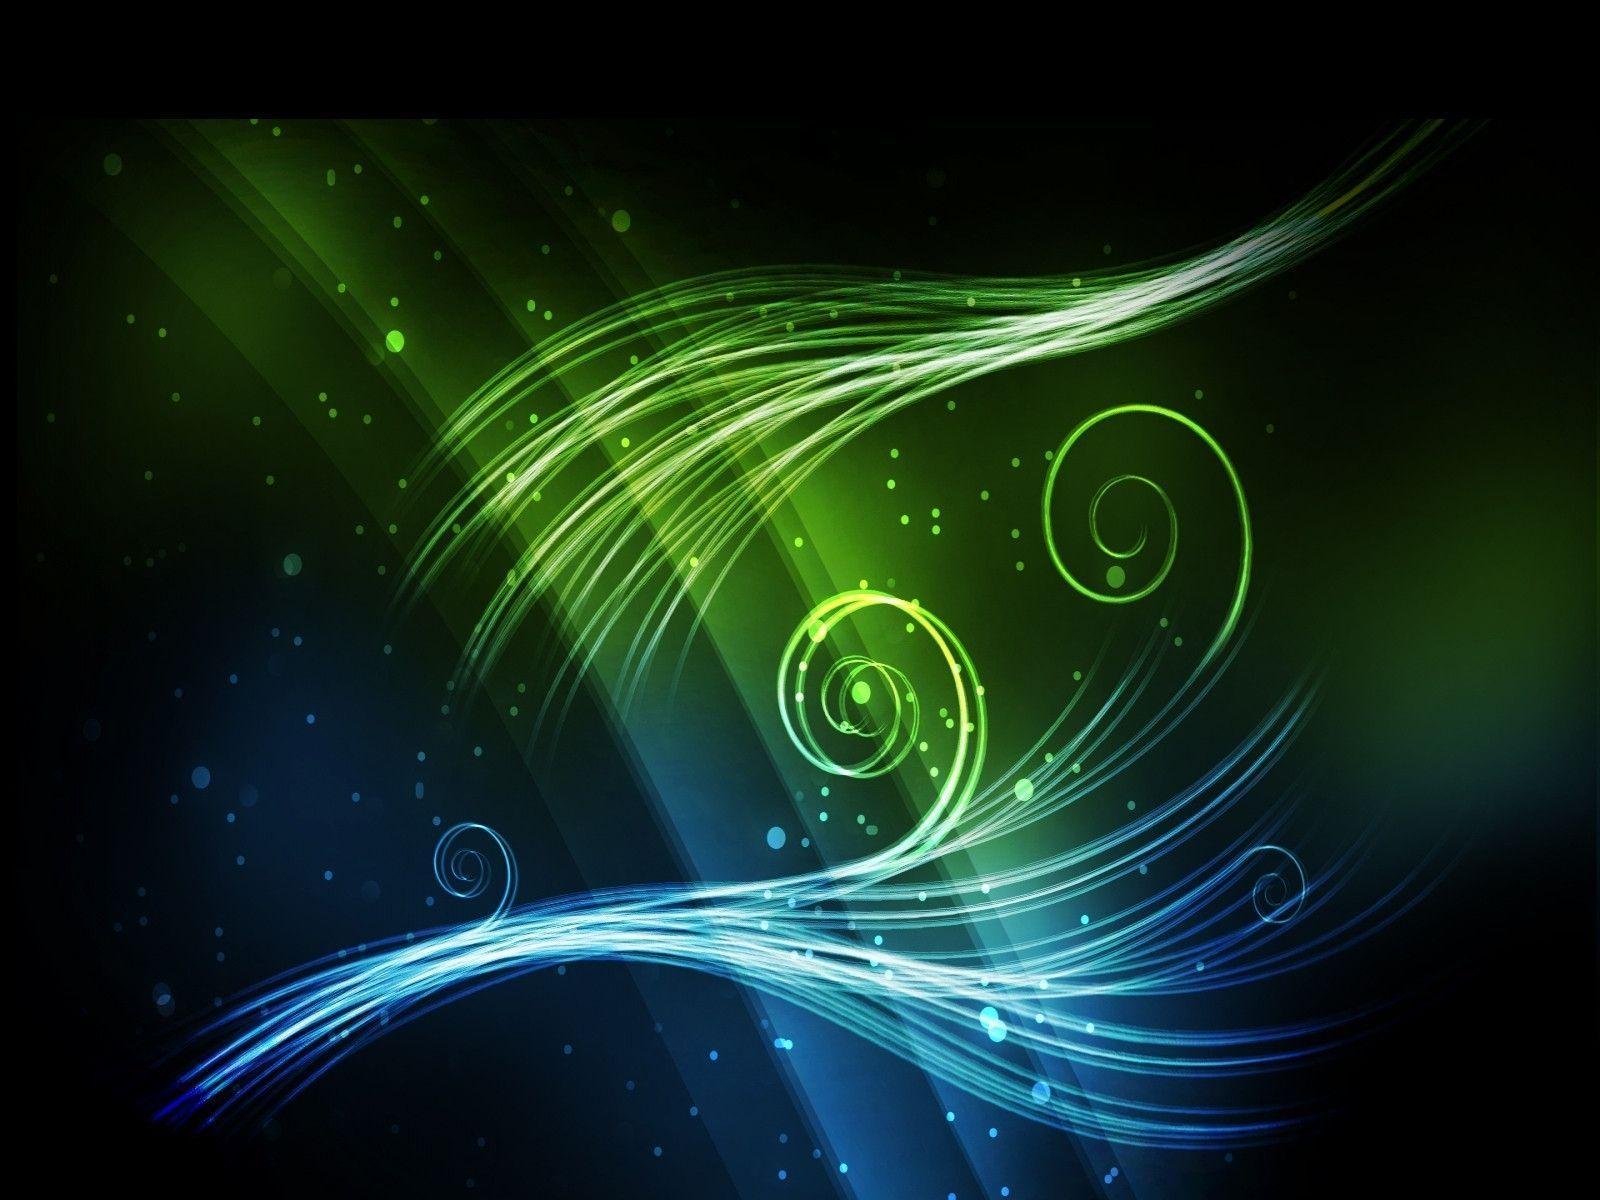 Download 1920x1080 full hd 1080p 1080i abstract blue green